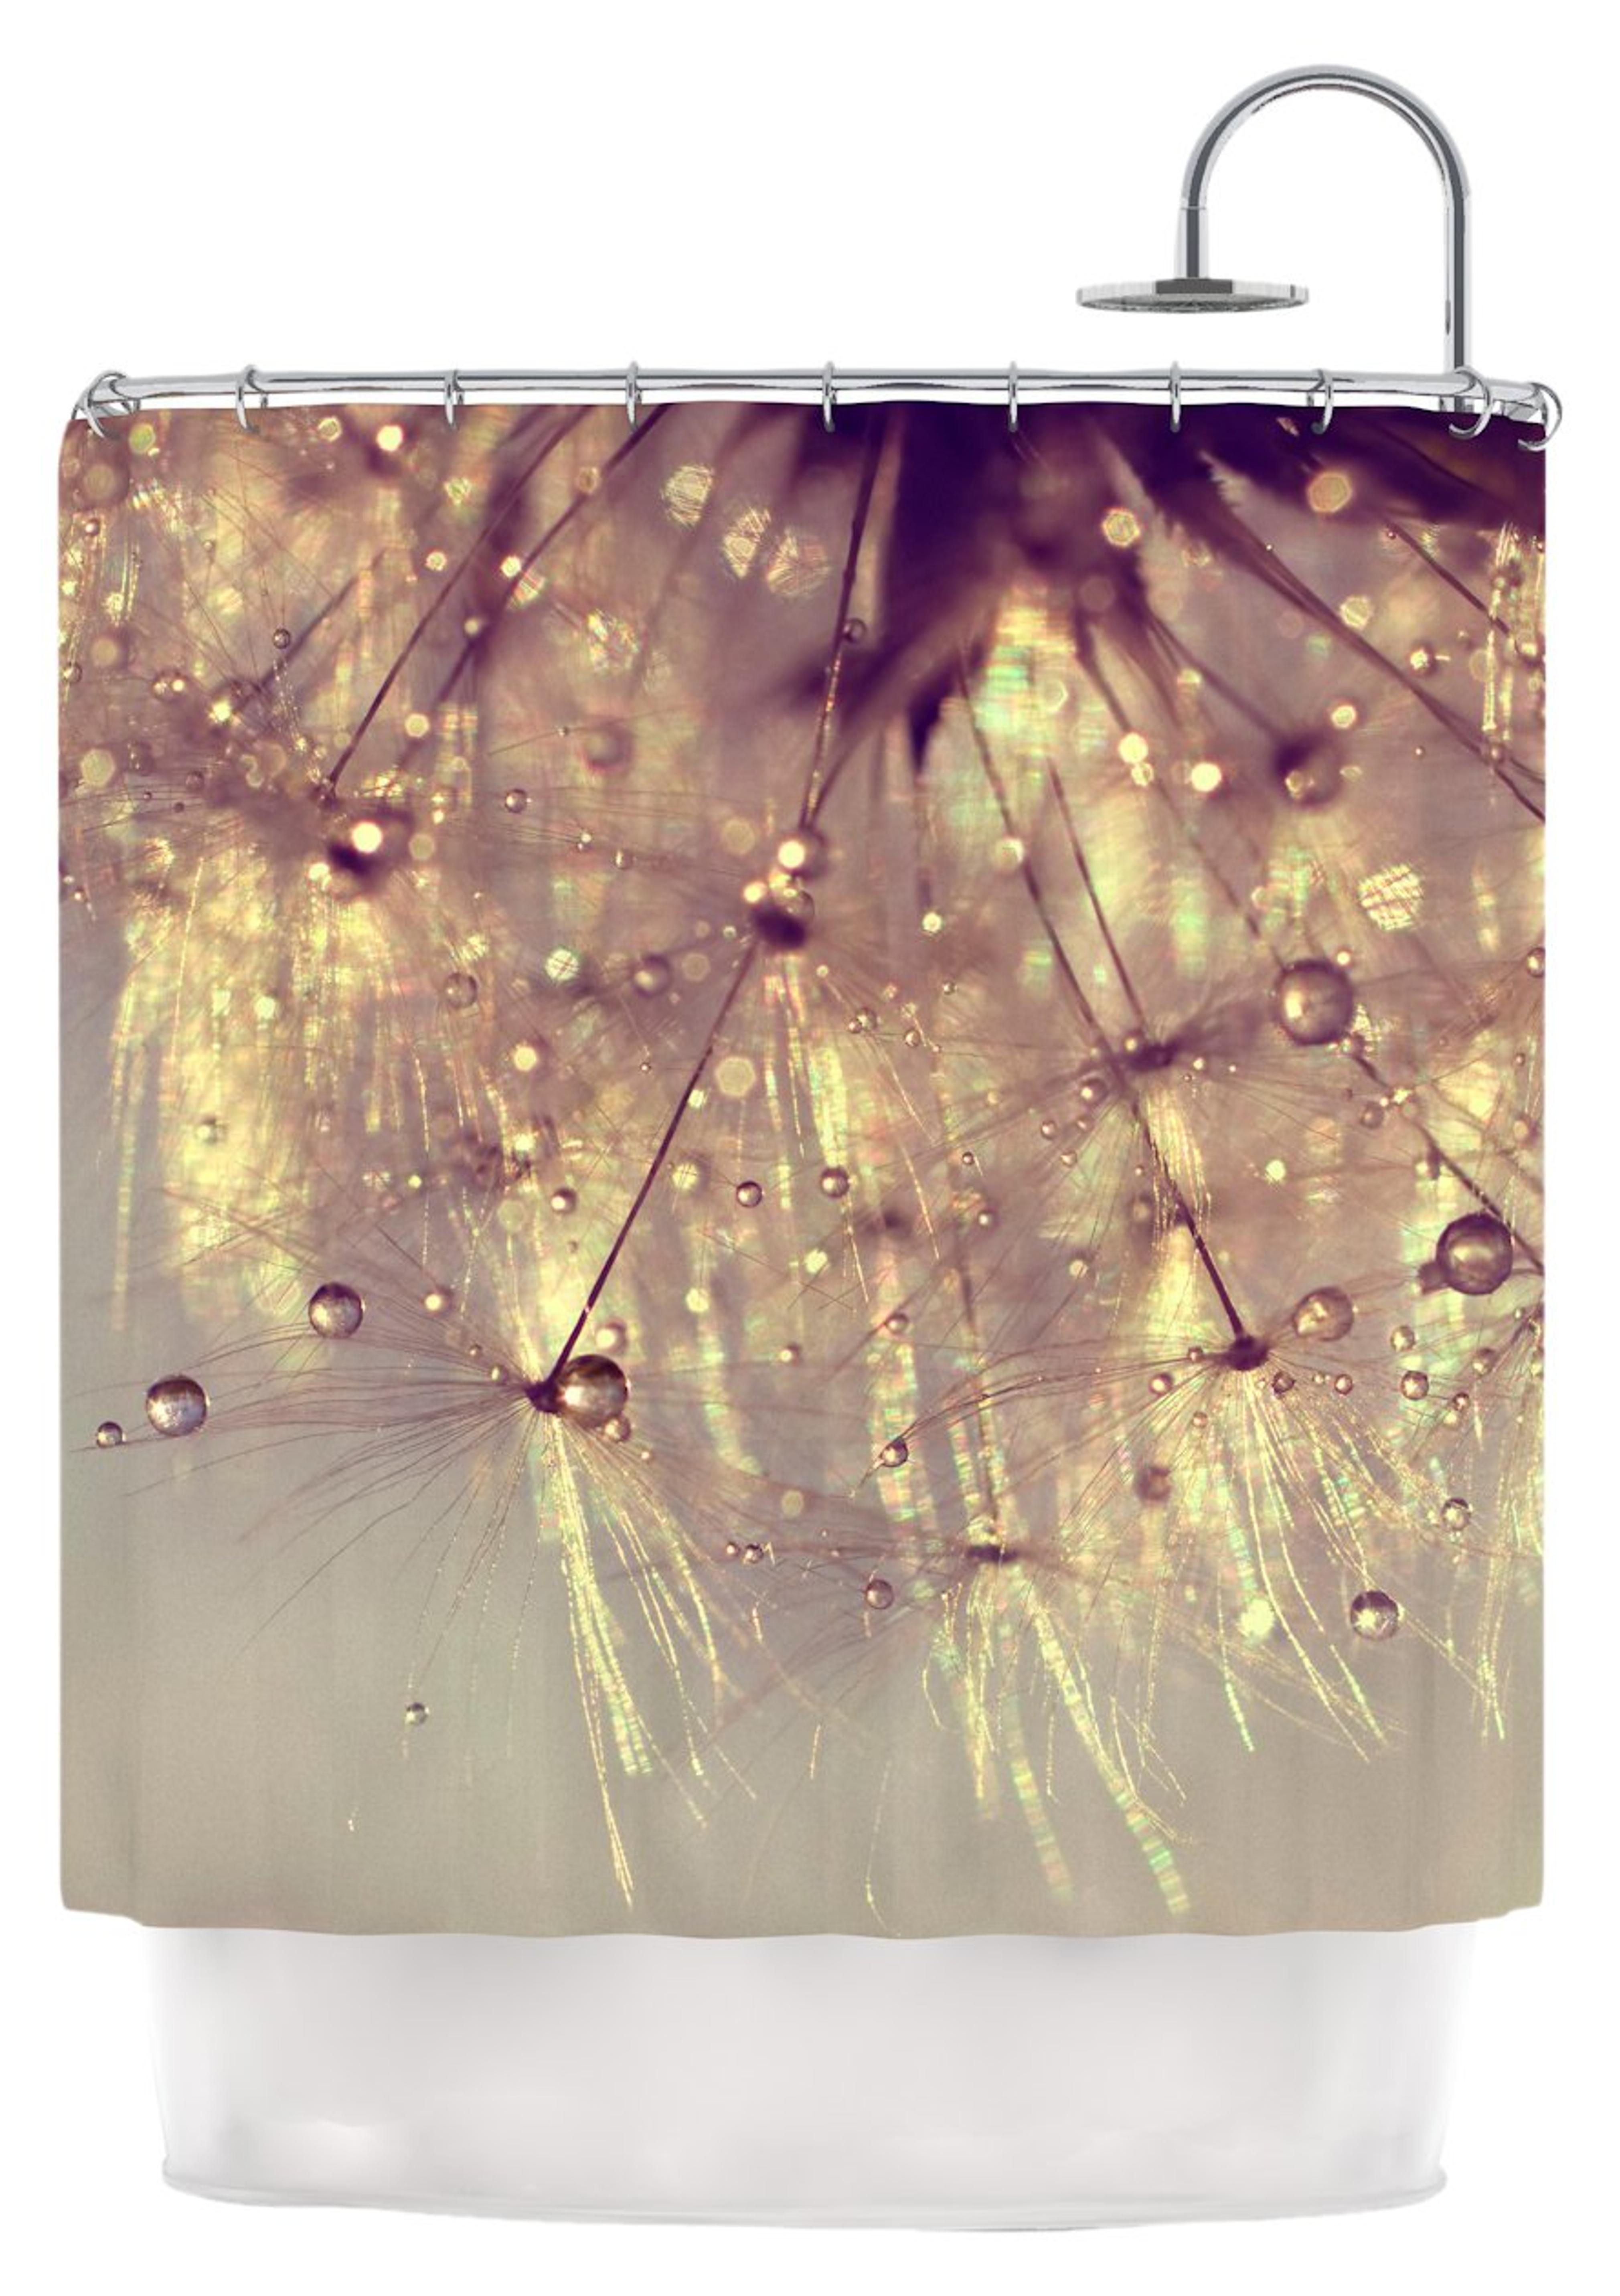 Kess InHouse Ingrid Beddoes Sparkles of Gold Shower Curtain, 69 by 70-Inch